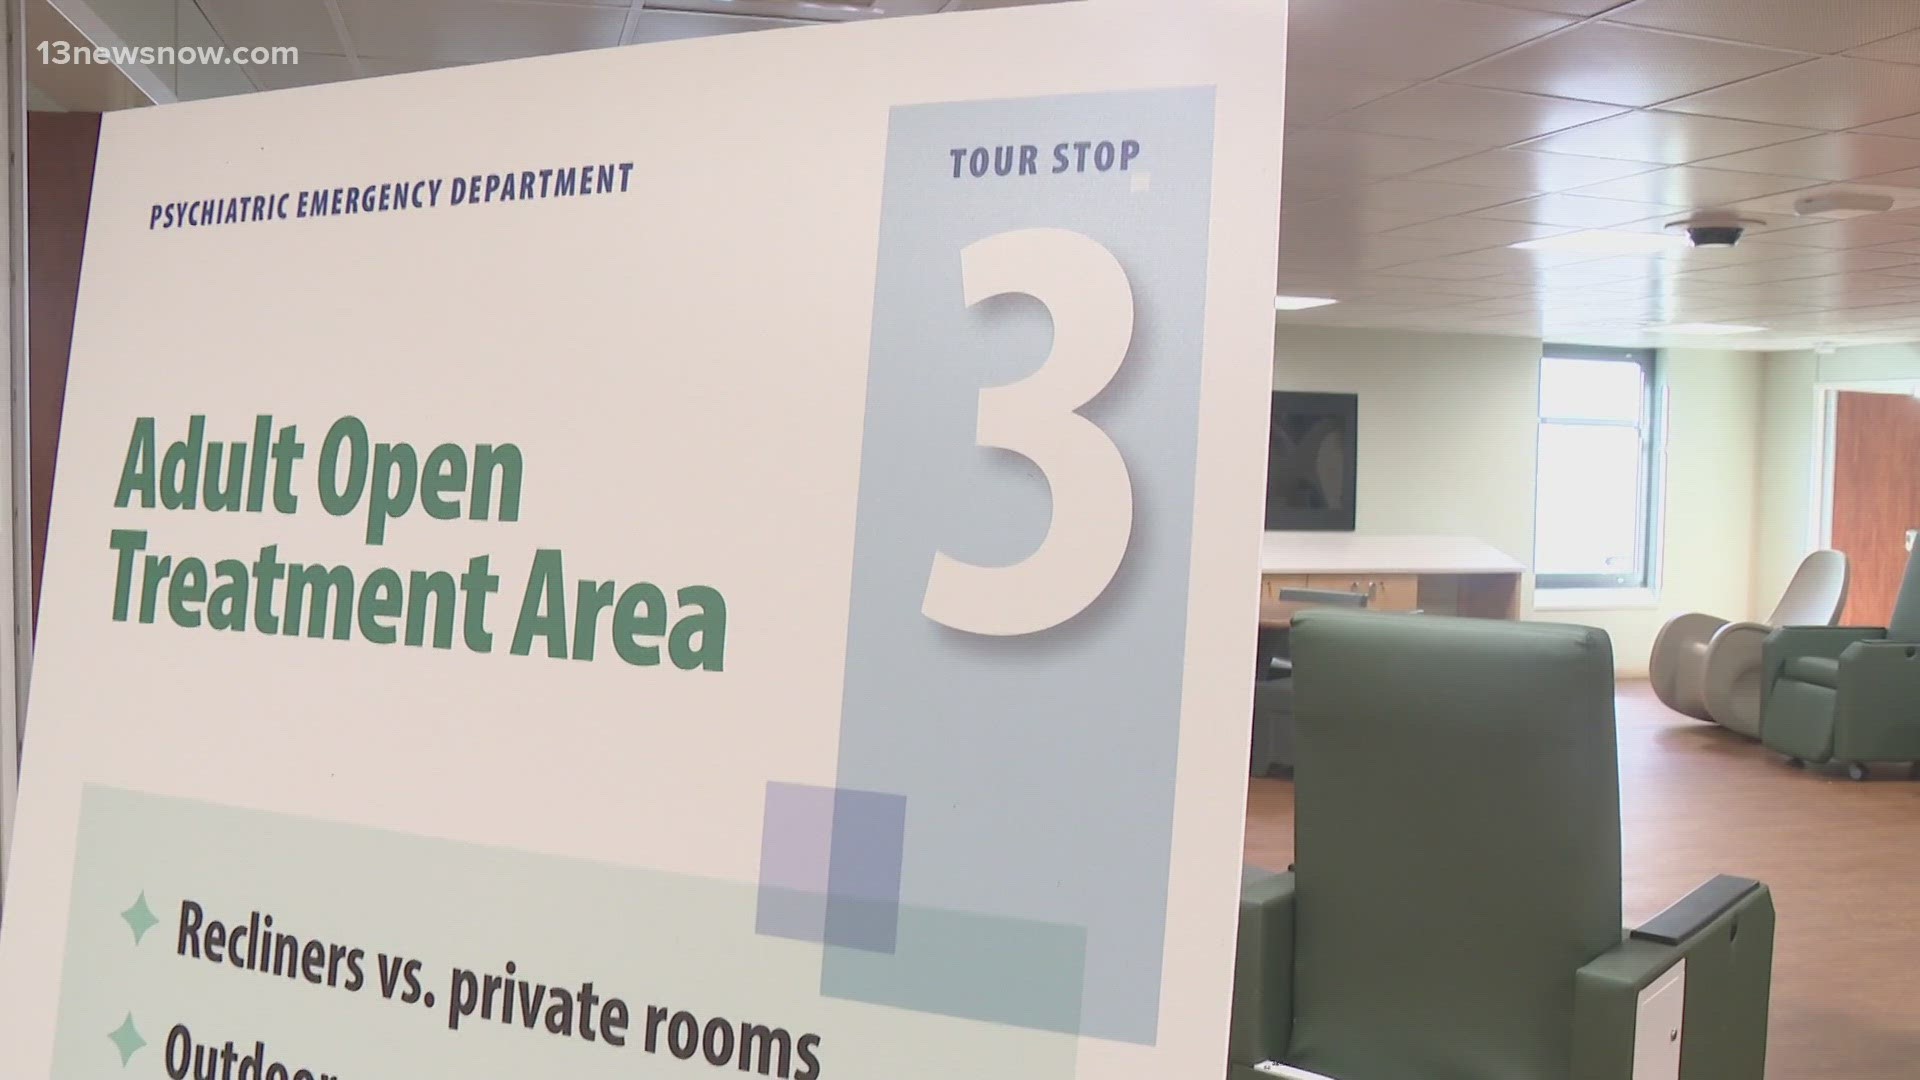 Riverside Health is celebrating the first standalone psychiatric emergency department in the state.